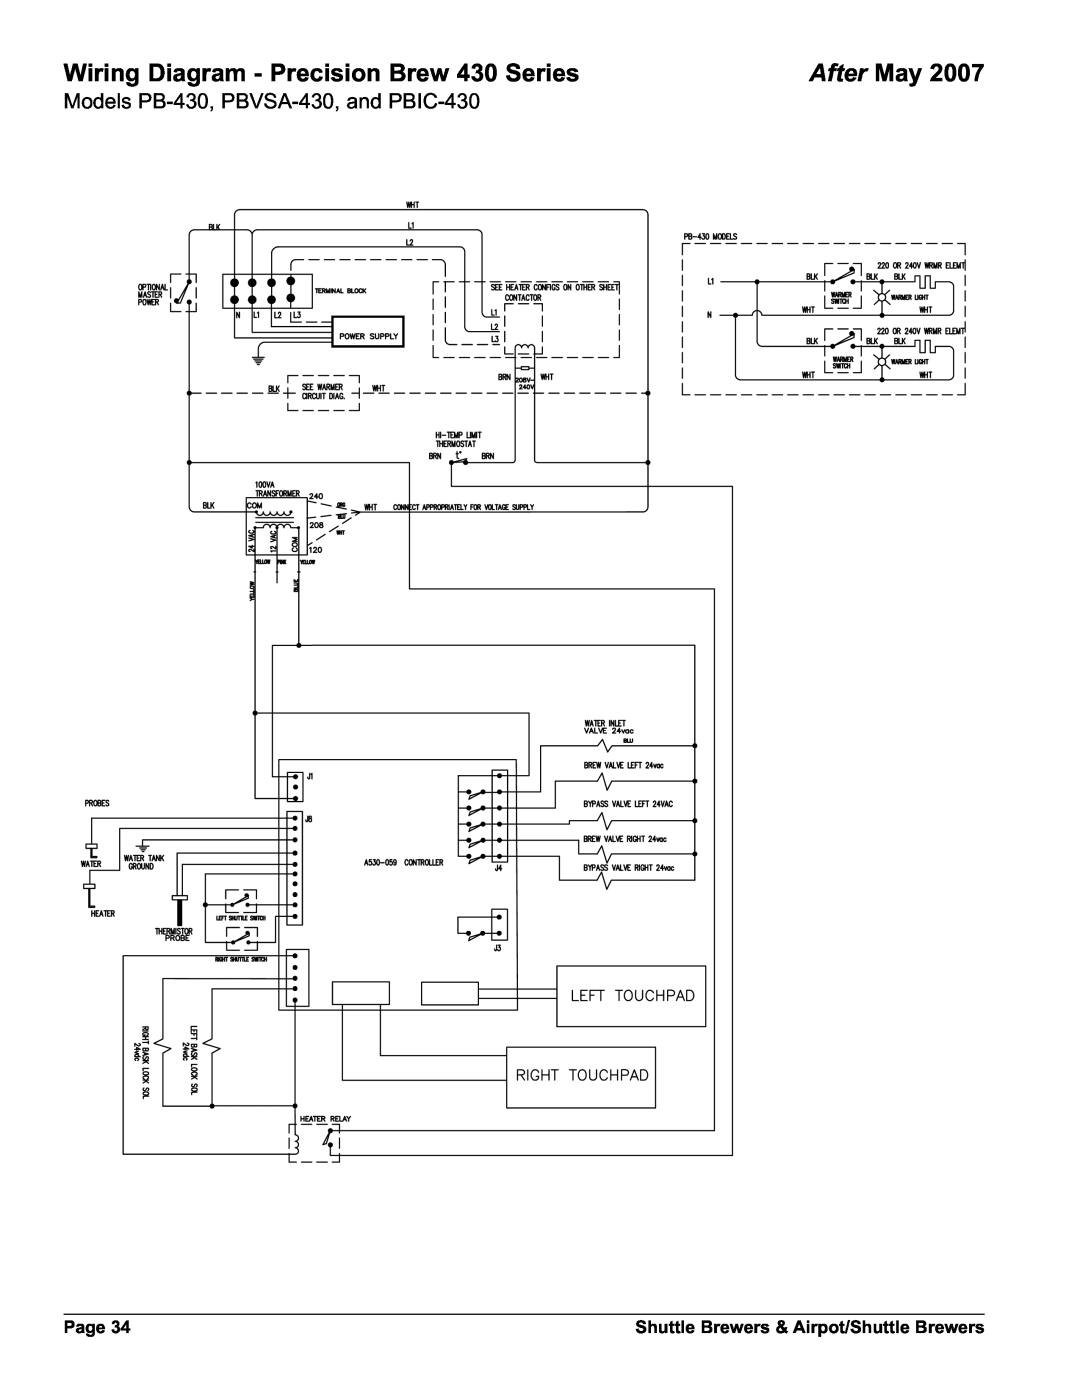 Grindmaster AM-344-04 instruction manual After May, Wiring Diagram - Precision Brew 430 Series, Page 